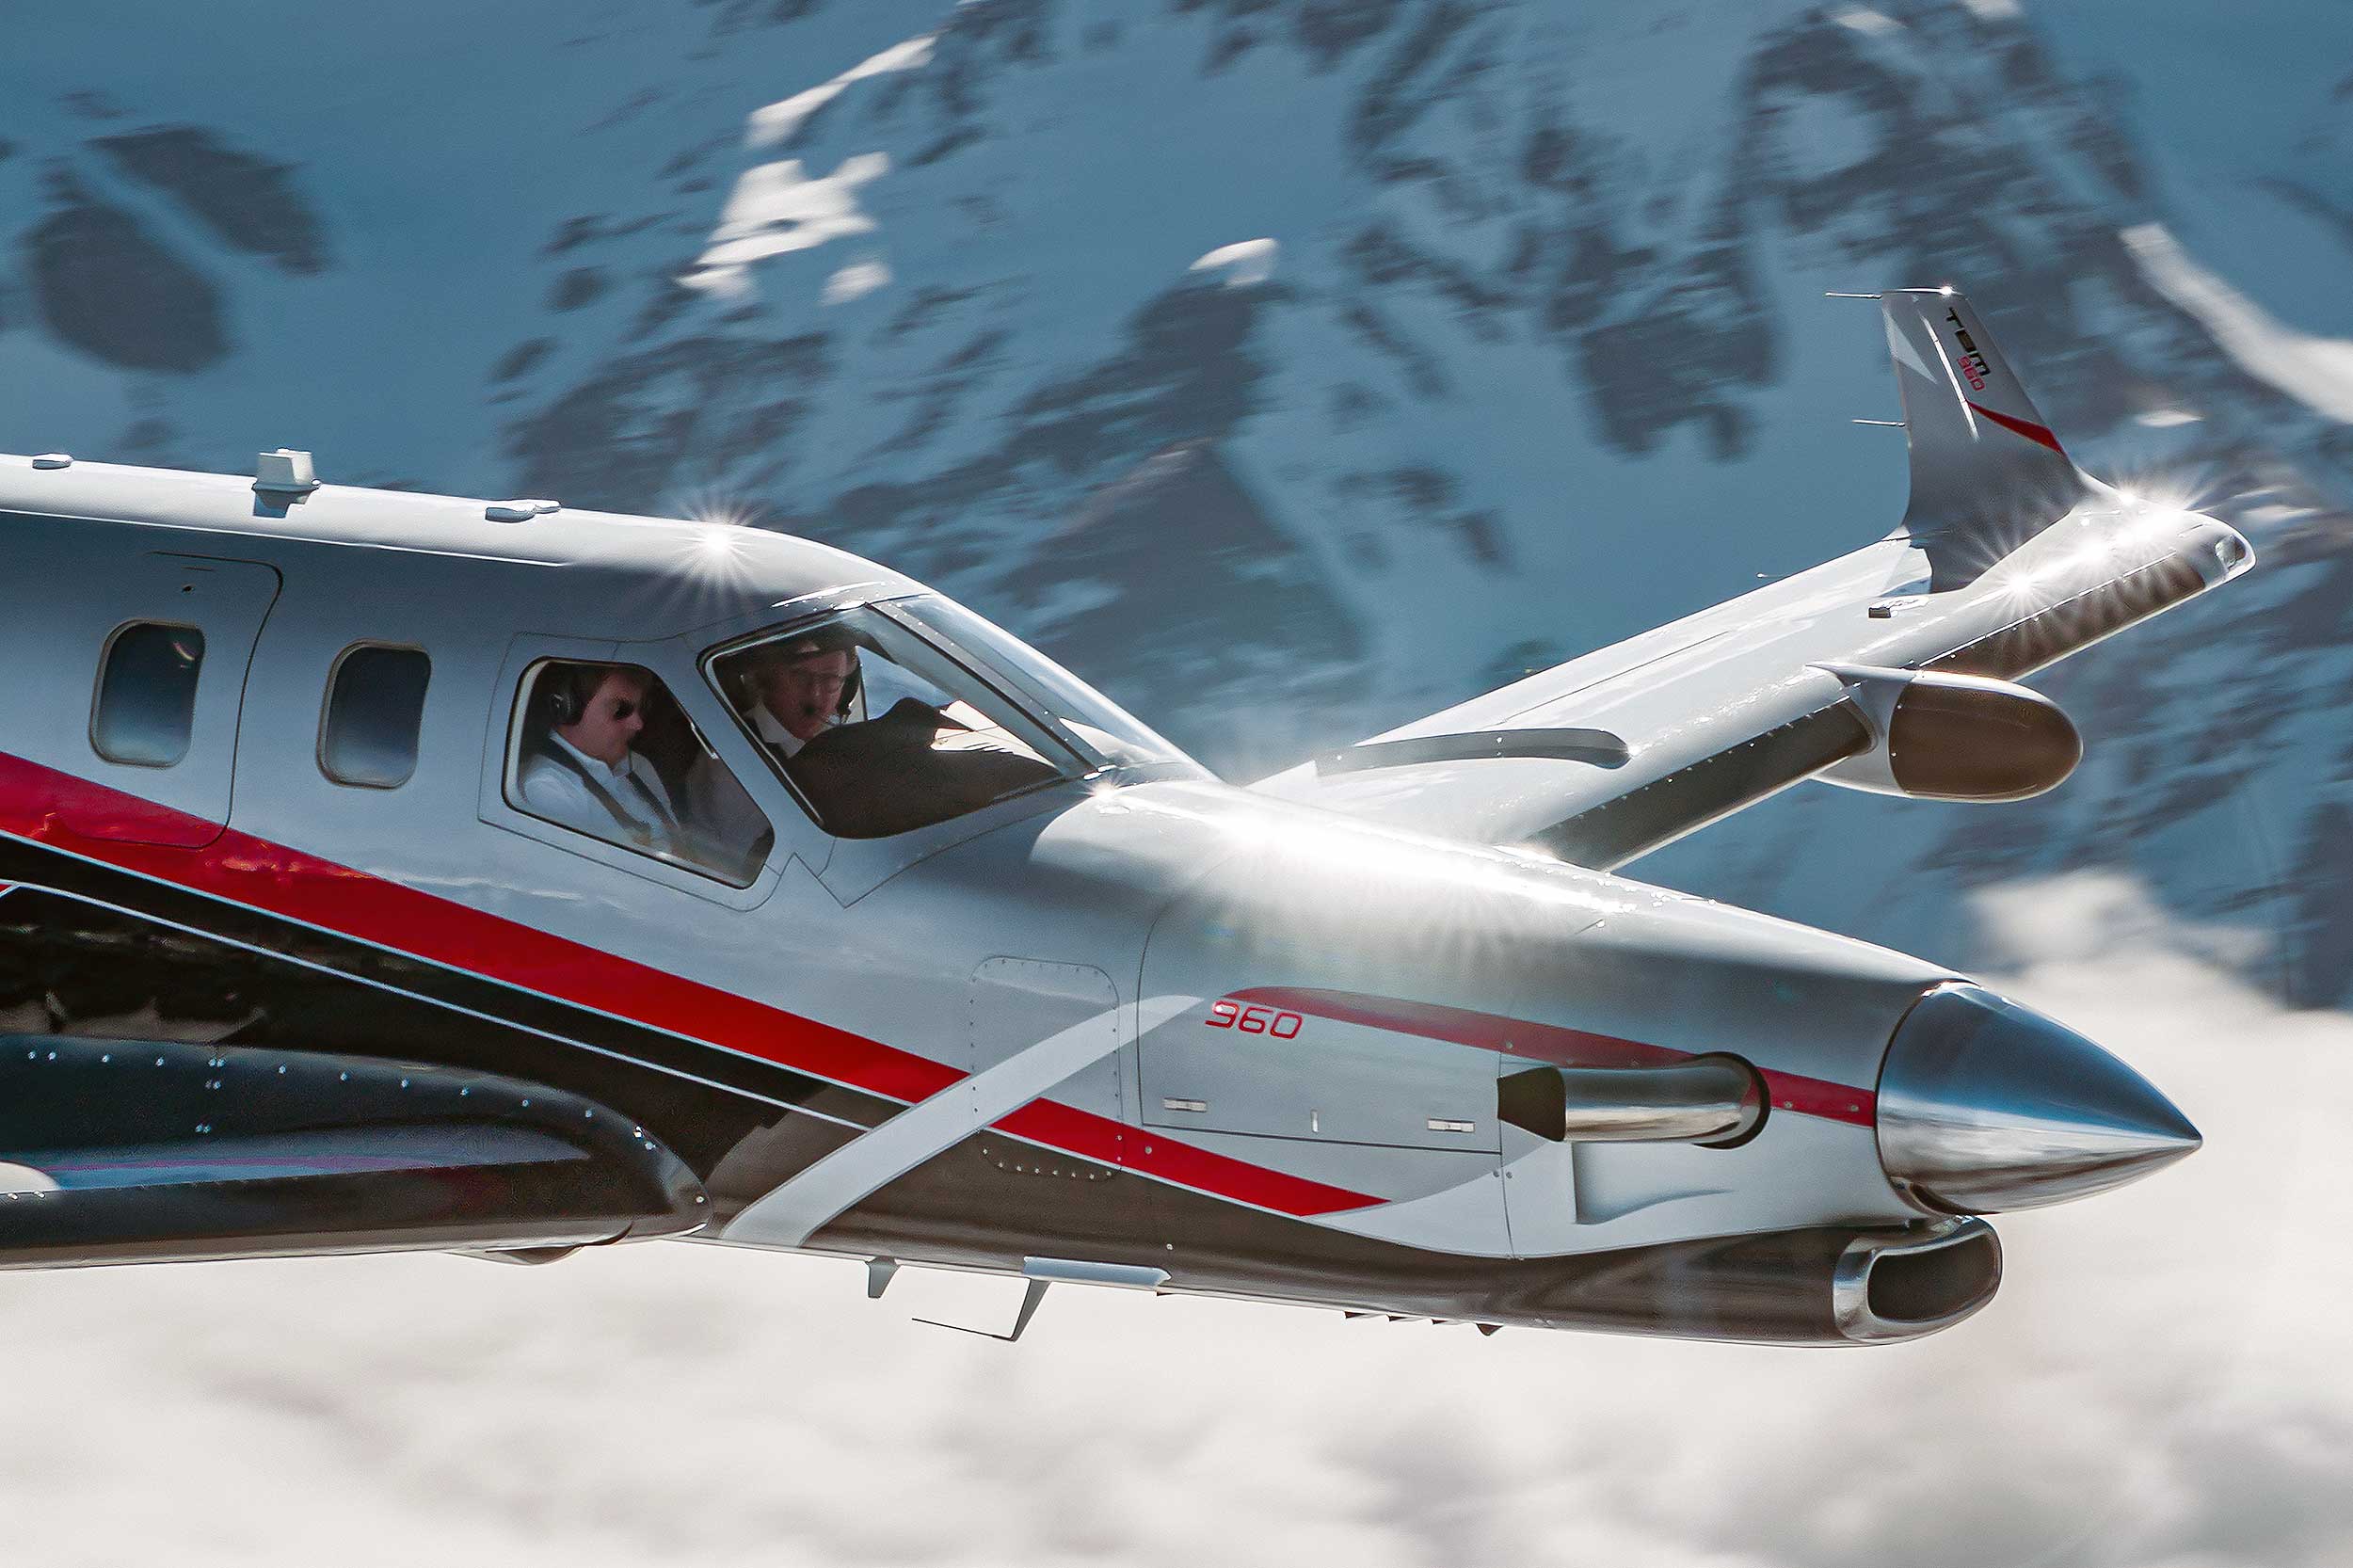 TBM 960 is equipped with a special version of the Pratt & Whitney PT6 turboprop engine